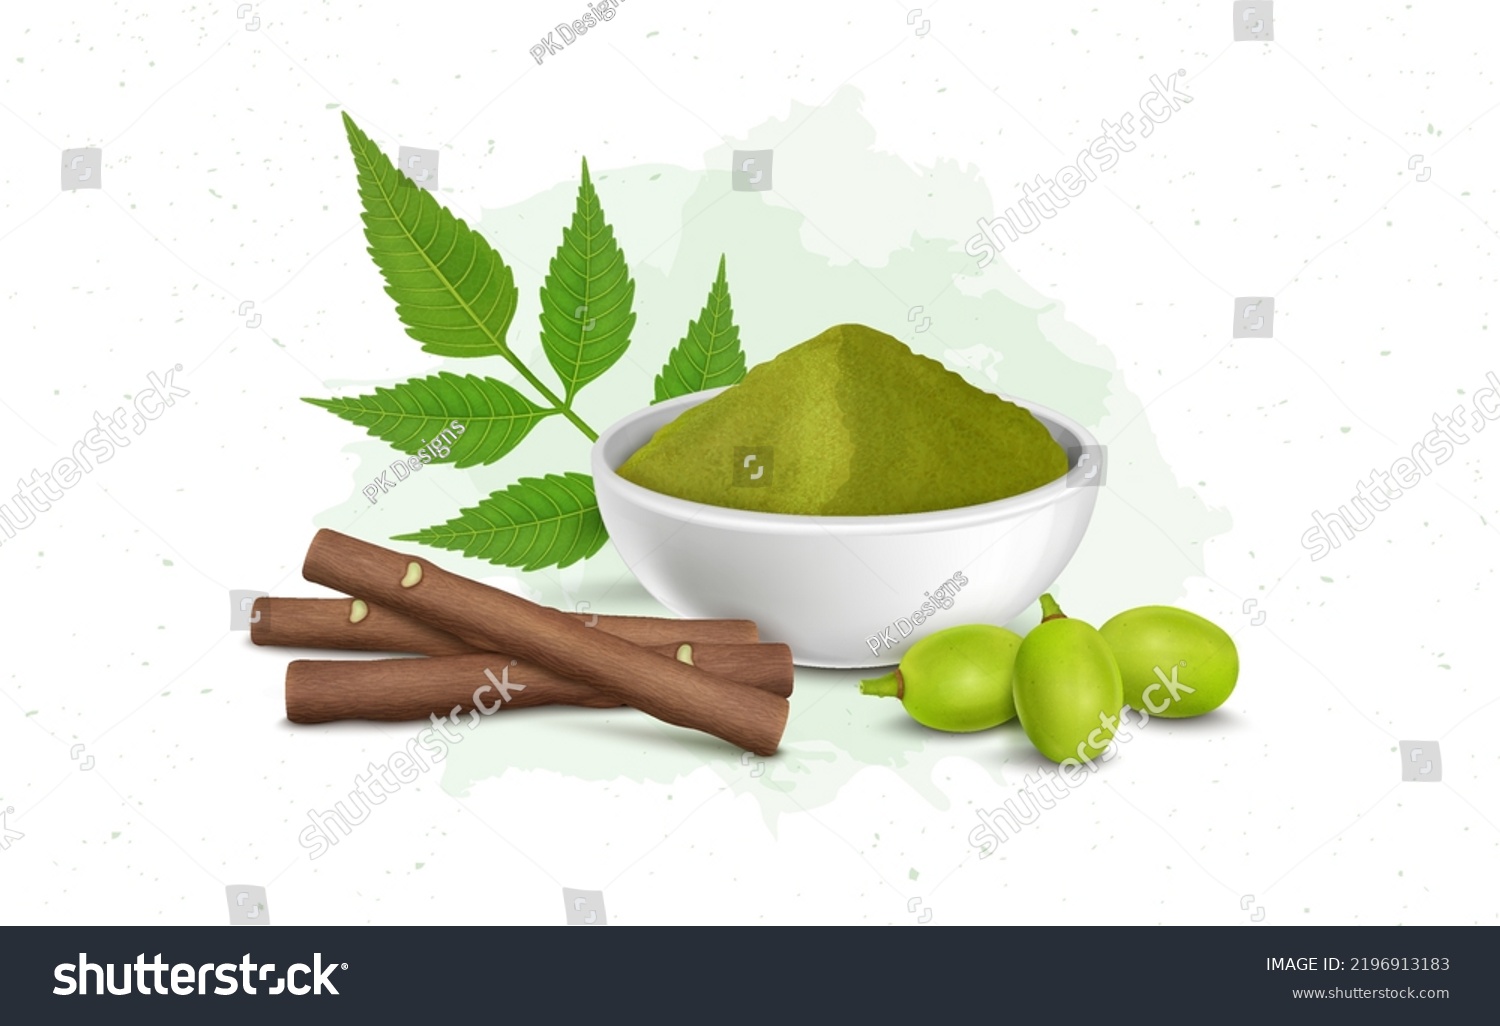 SVG of Neem powder vector illustration with neem chew sticks and fruits svg